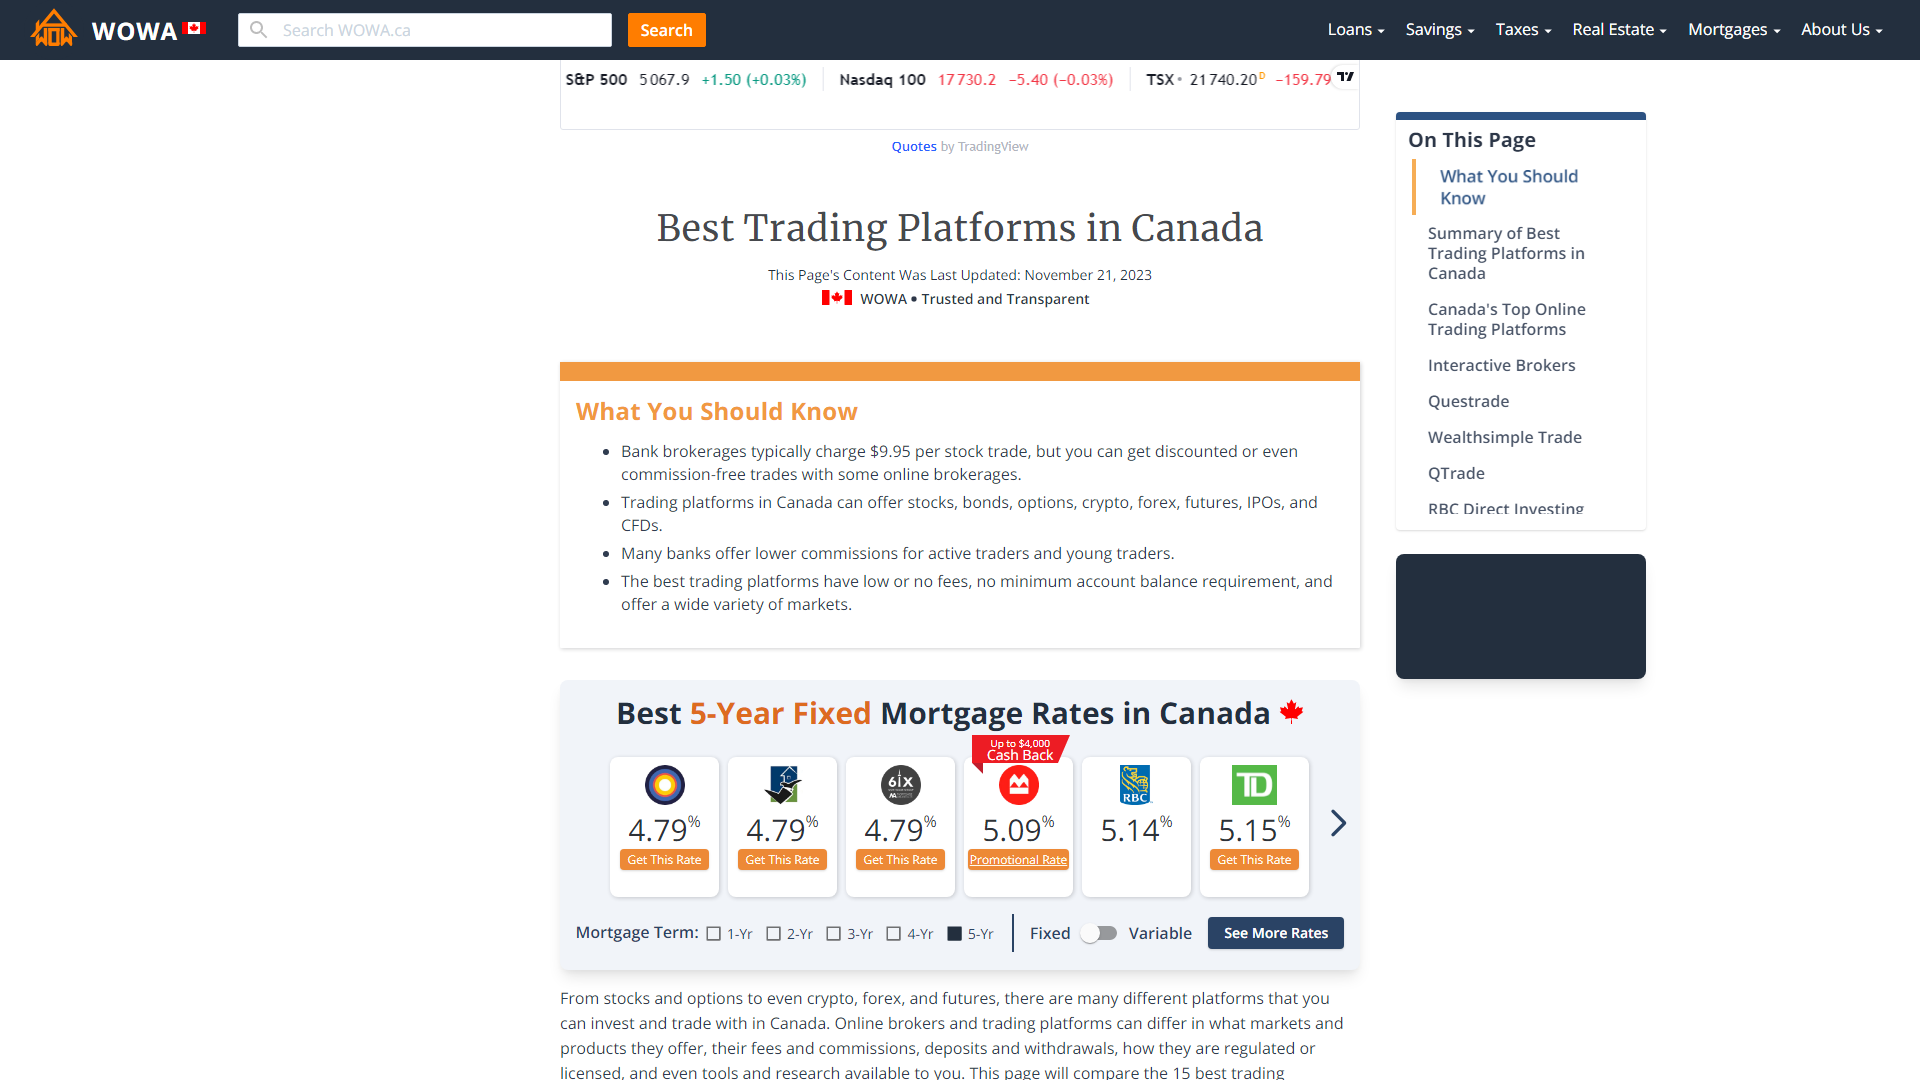 Free Trading: The 4 Best Zero-Commission Brokers in Canada